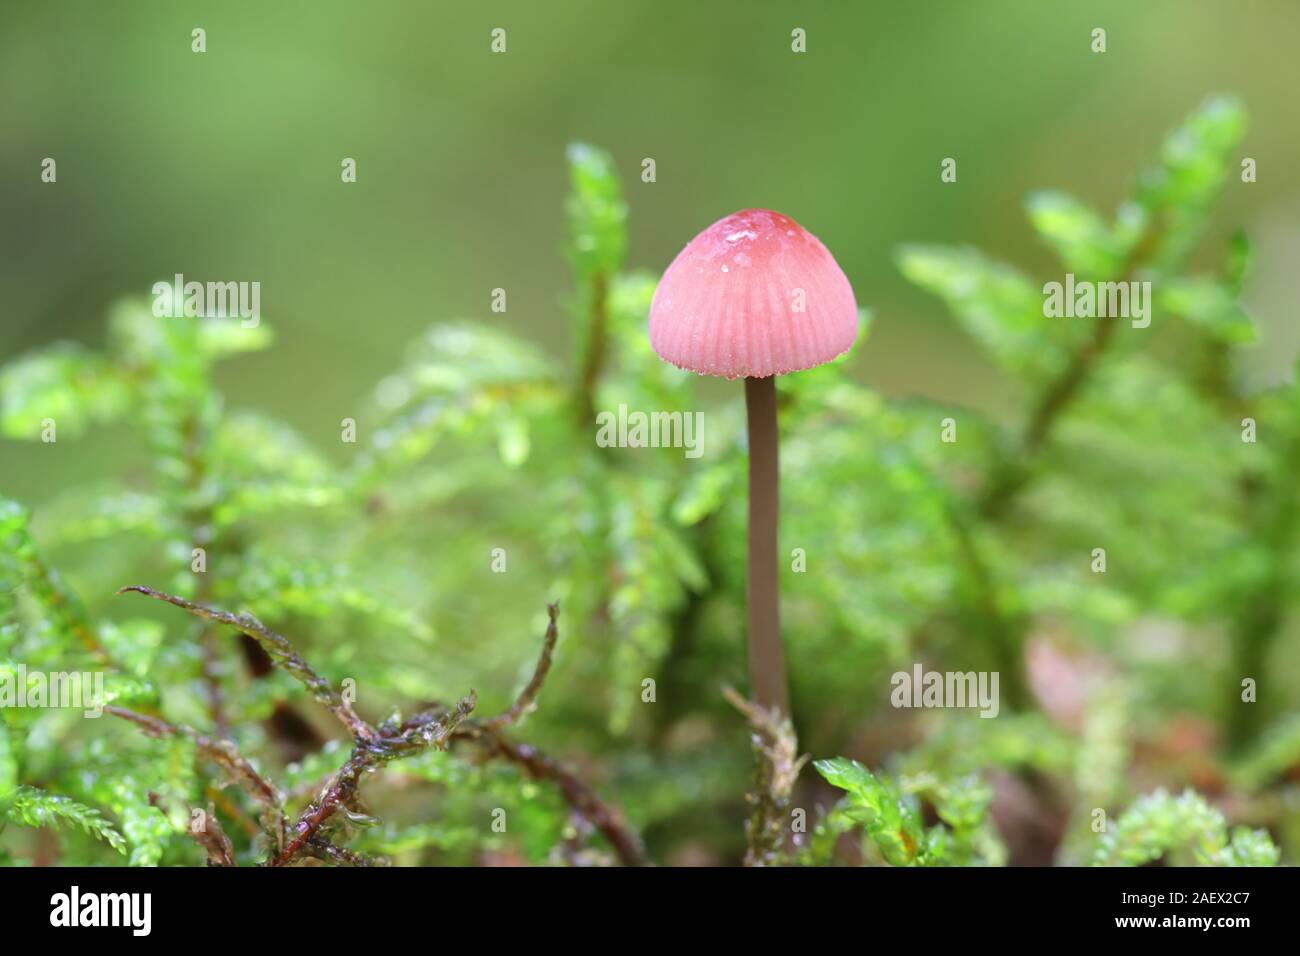 Mycena rosella, known as the pink bonnet, mushrooms from Finland Stock Photo